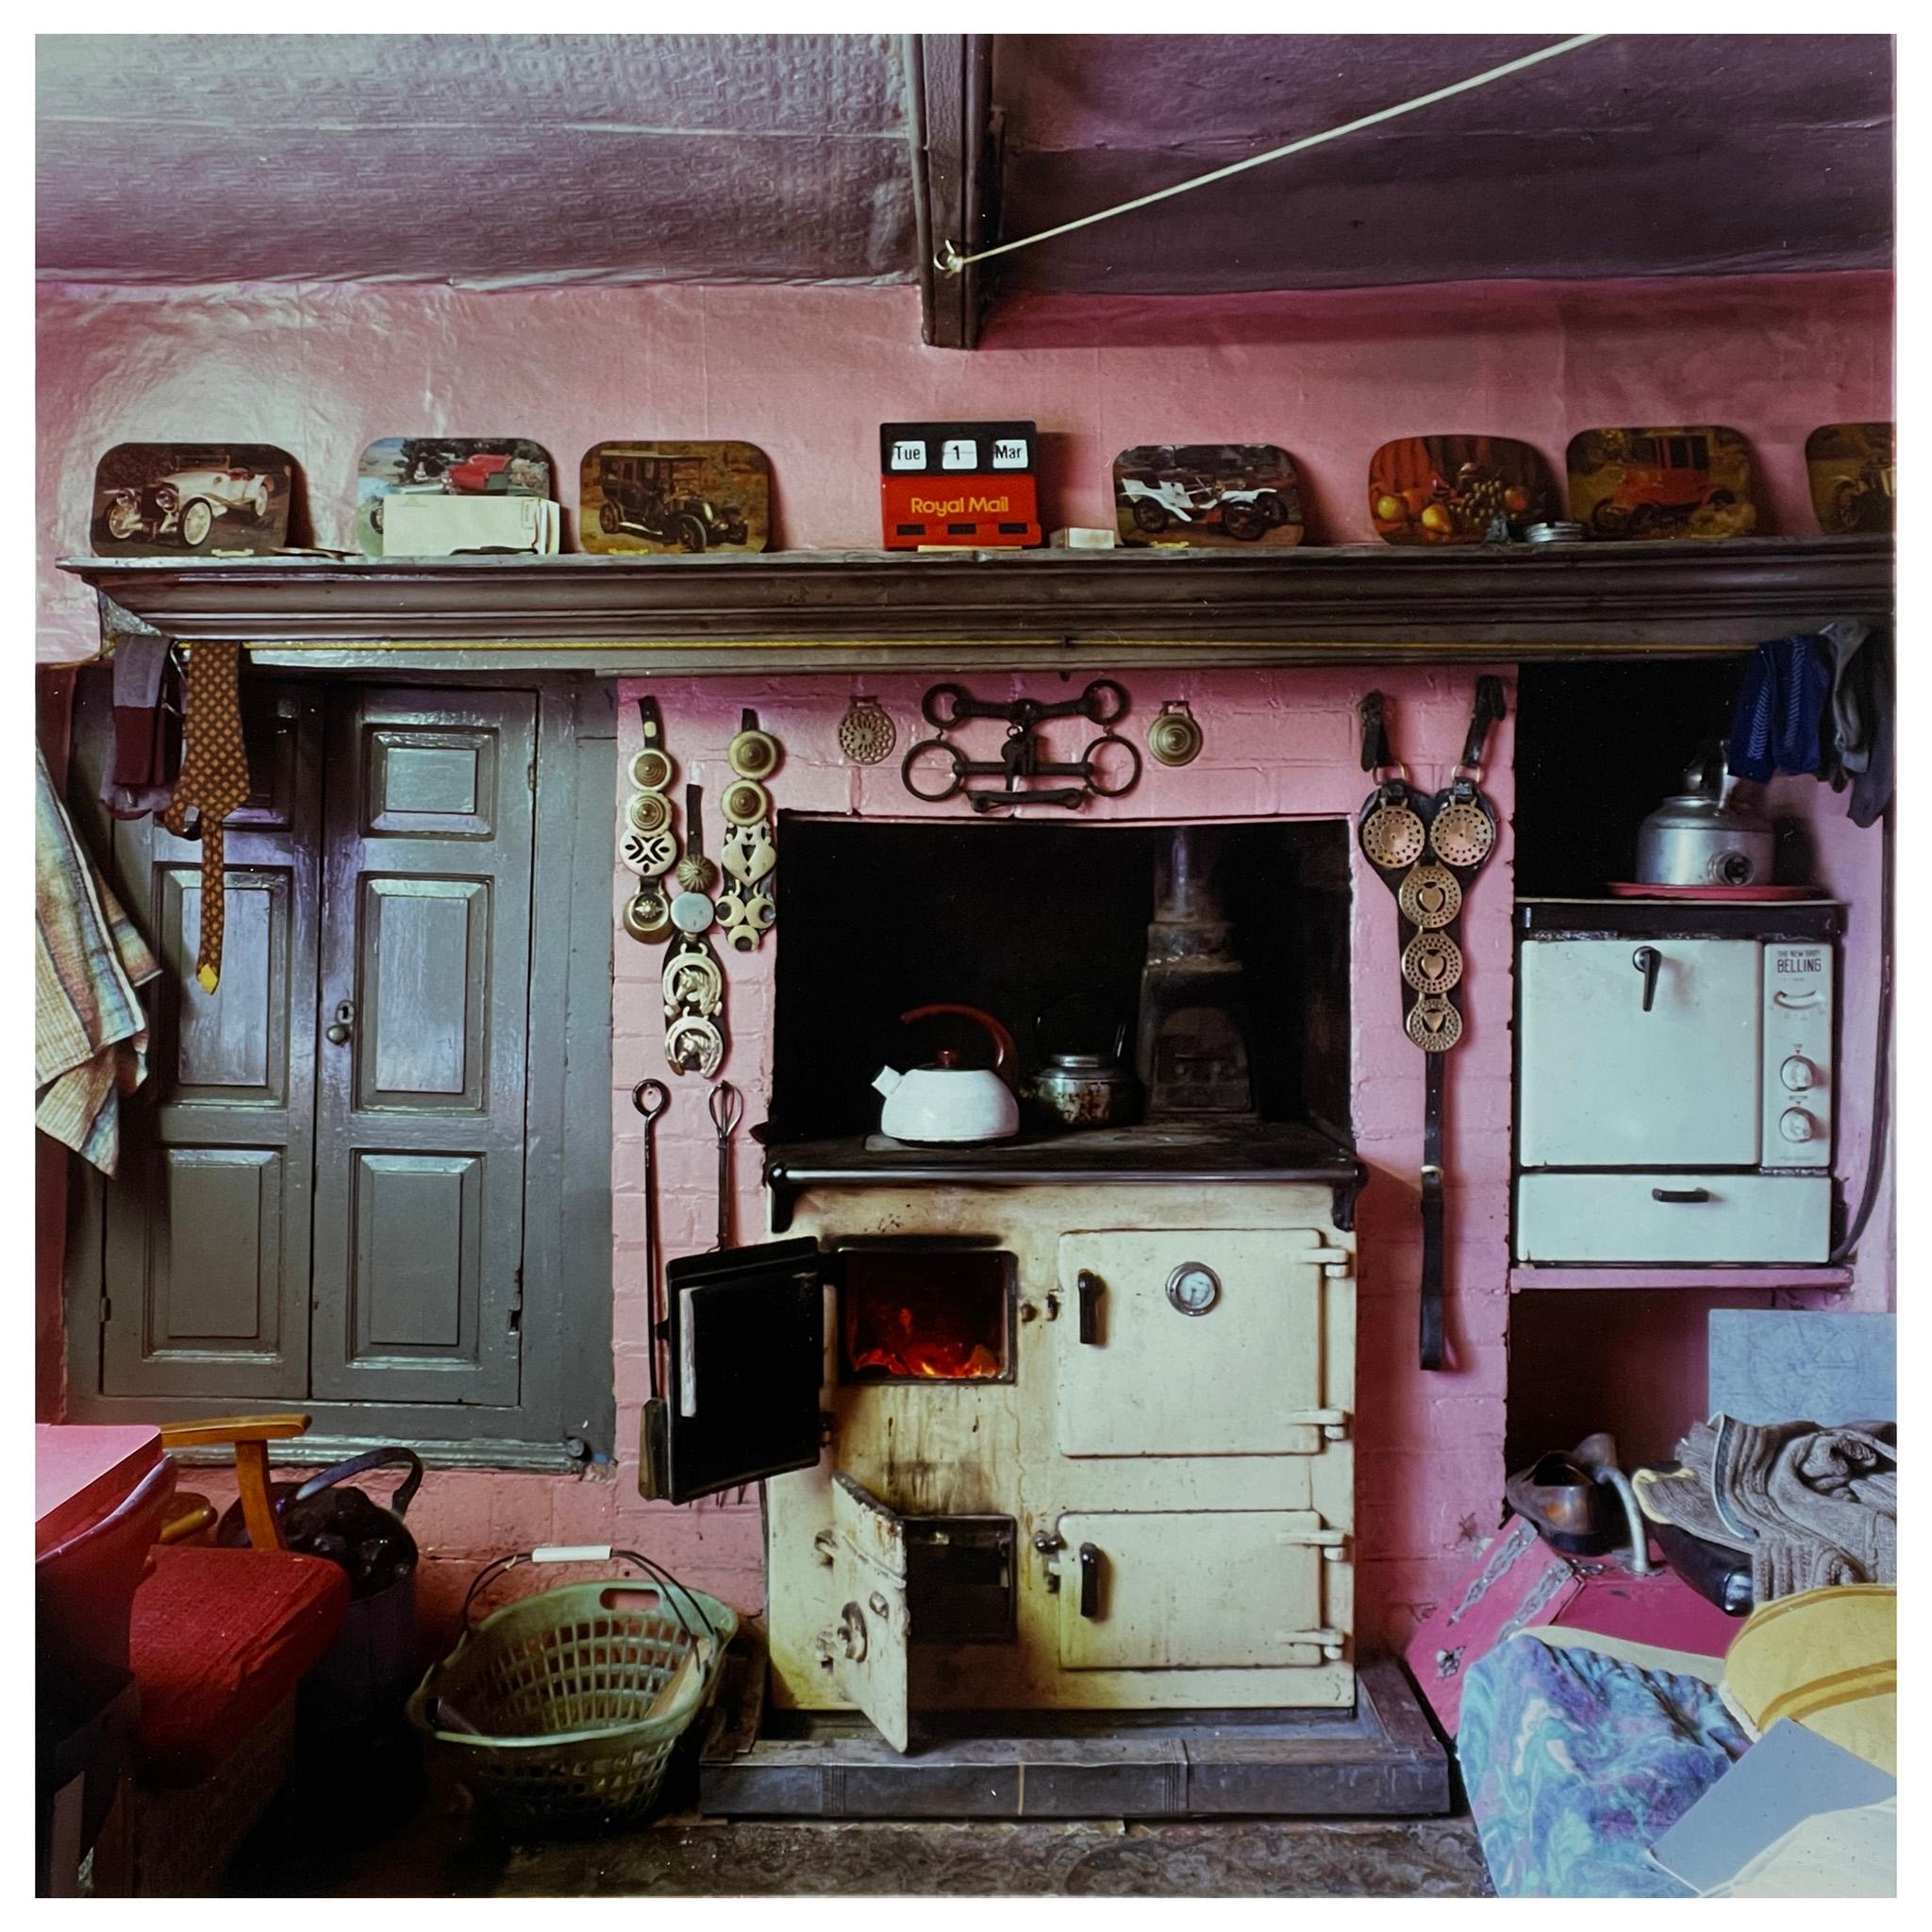 Richard Heeps 'Ordinary Places' Series, captures Britain on the brink of change. It was Richard's first colour series and it achieved much success with an exhibition at the Photographers Gallery in 1989 which then went on to tour Museums and Public